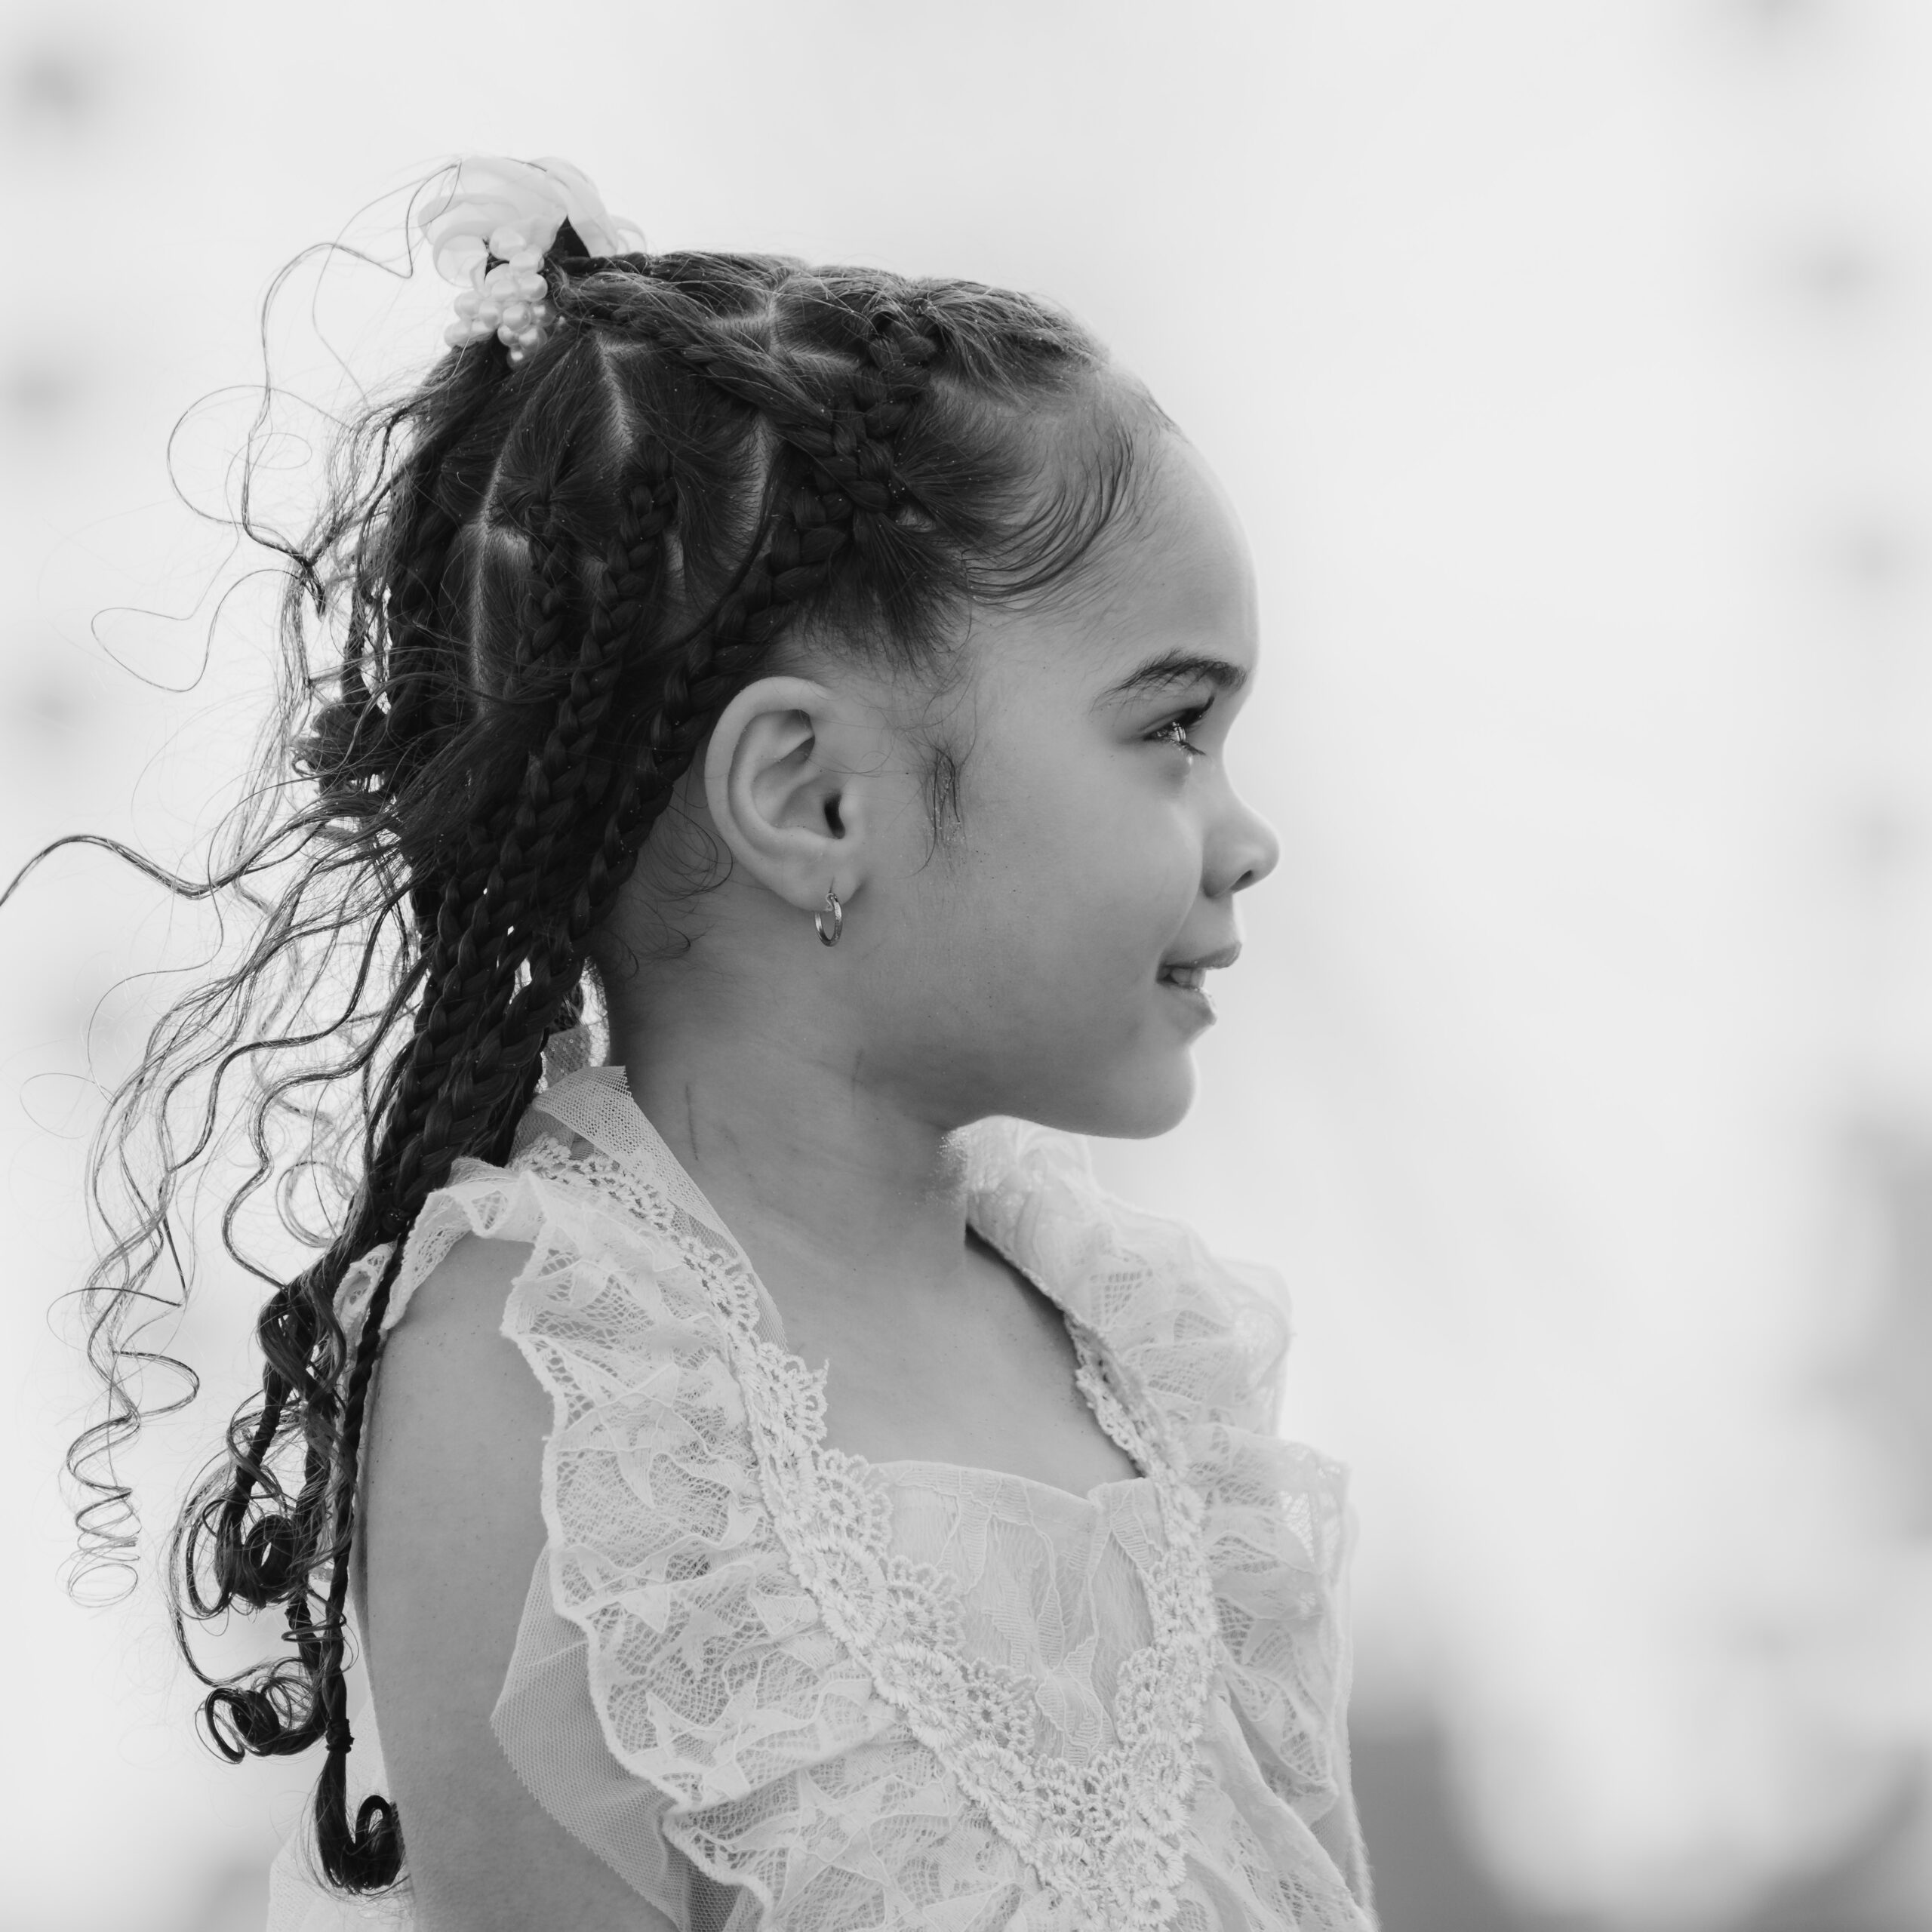 a young girl with braids in her hair